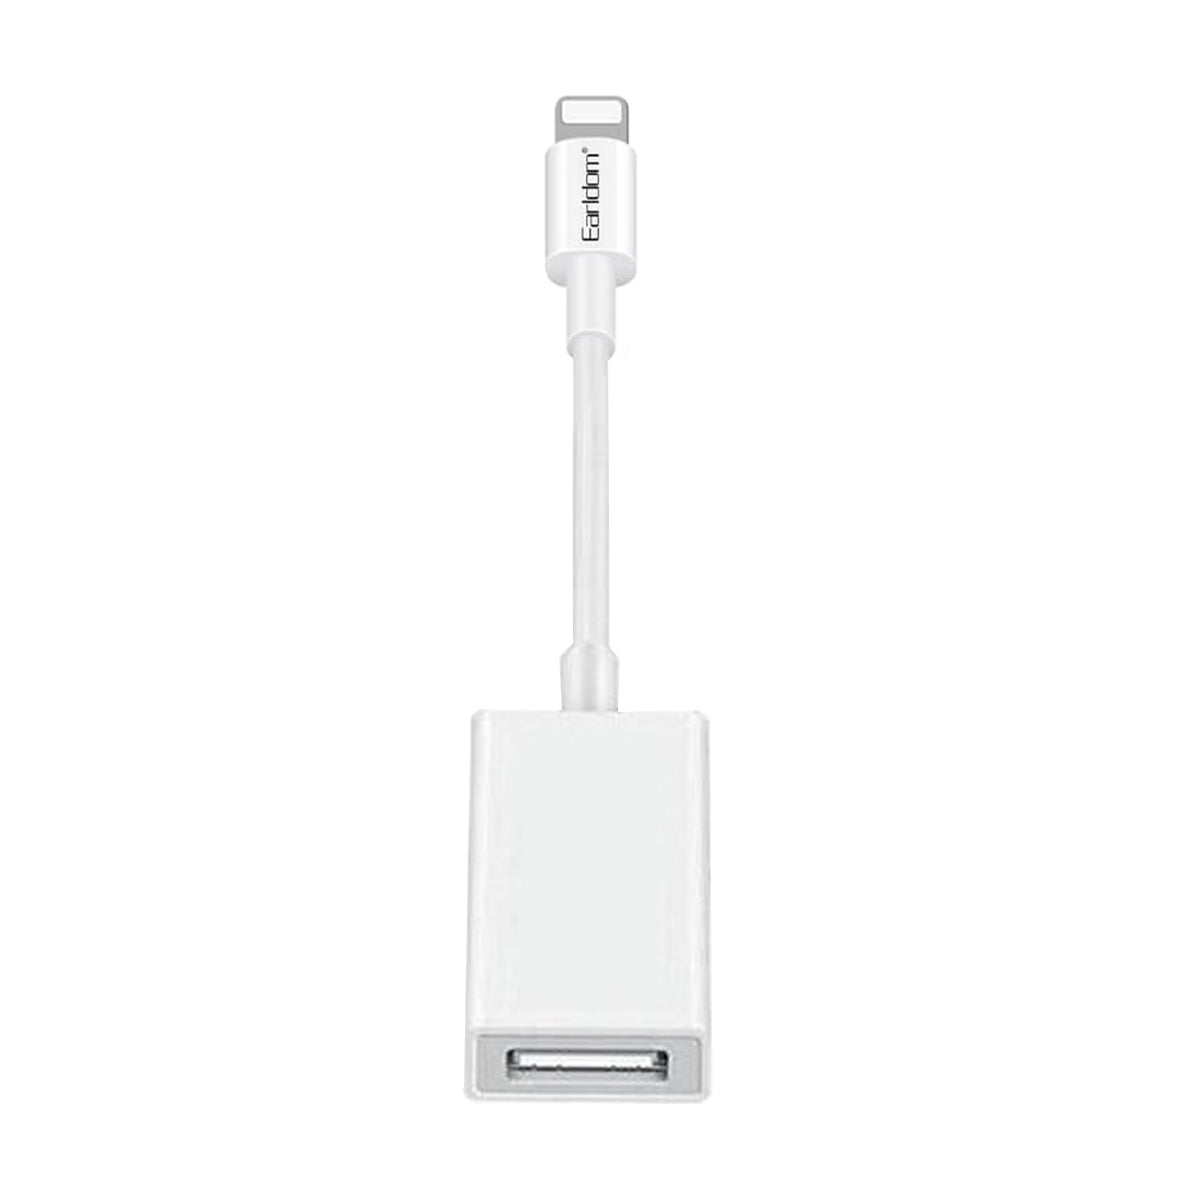 OTG Cable For iPhone, Lightning to USB A OTG Cord Converter, OTG Data Sync Cable Compatible with iPhone